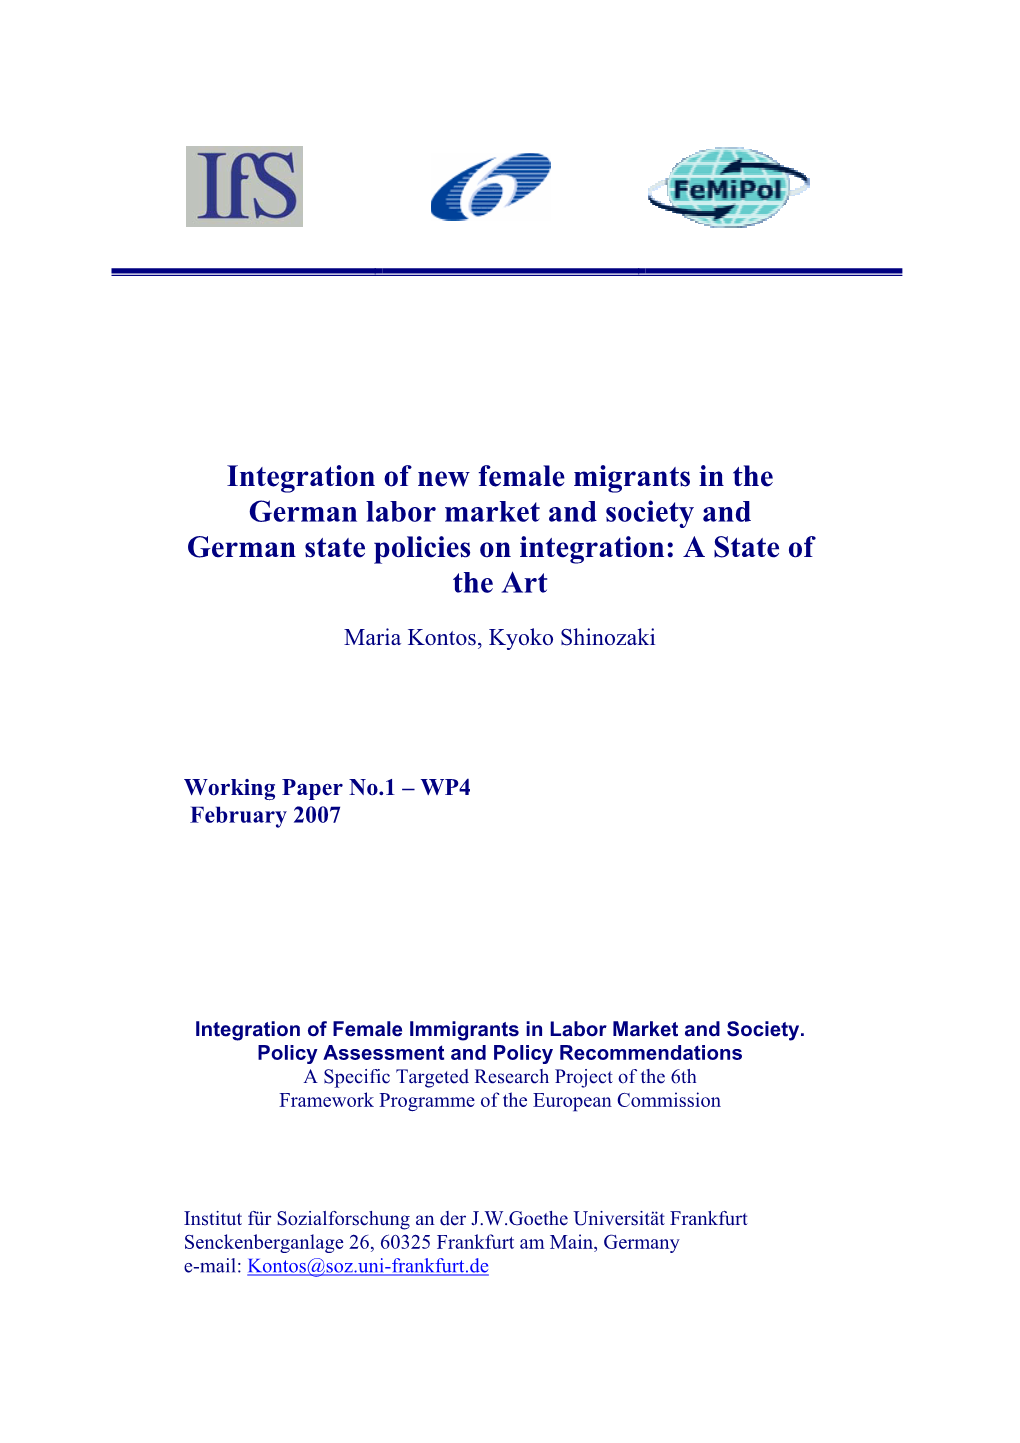 Integration of New Female Migrants in the German Labor Market and Society and German State Policies on Integration: a State of the Art